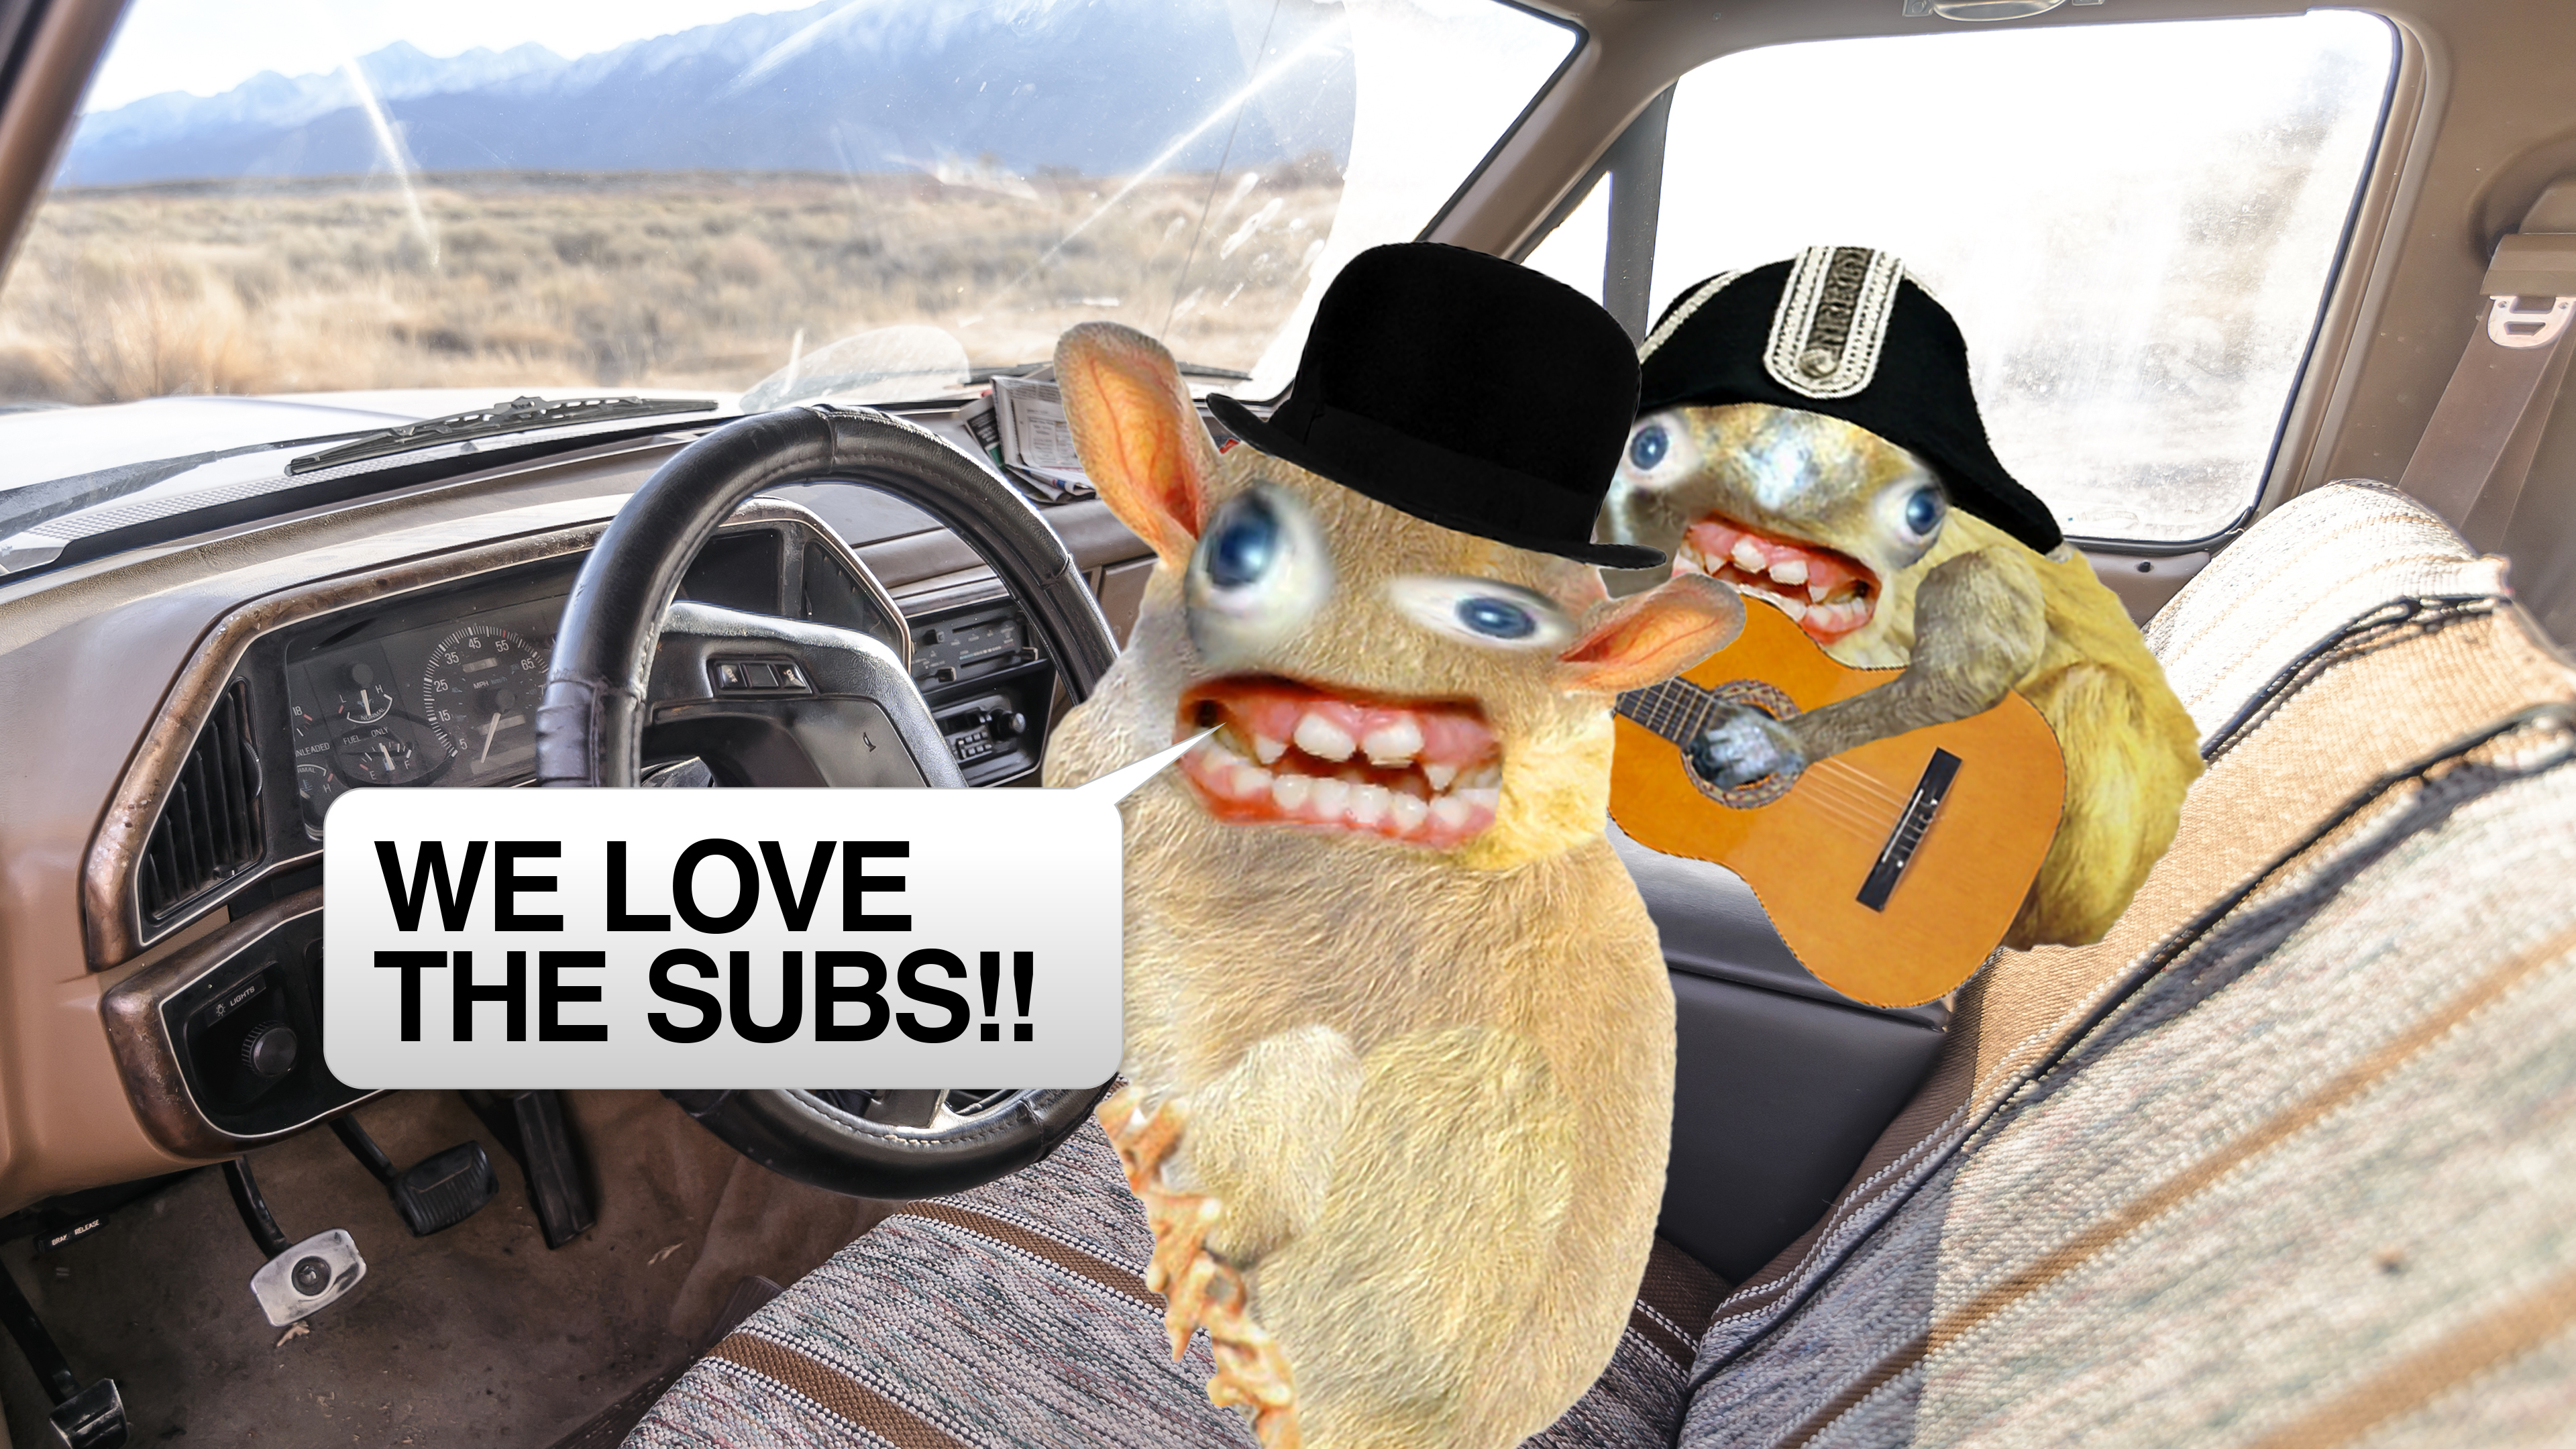 Two Spongmonkeys sit in a car wearing hats. One strums a guitar, while the other sings “We love the subs!!!”